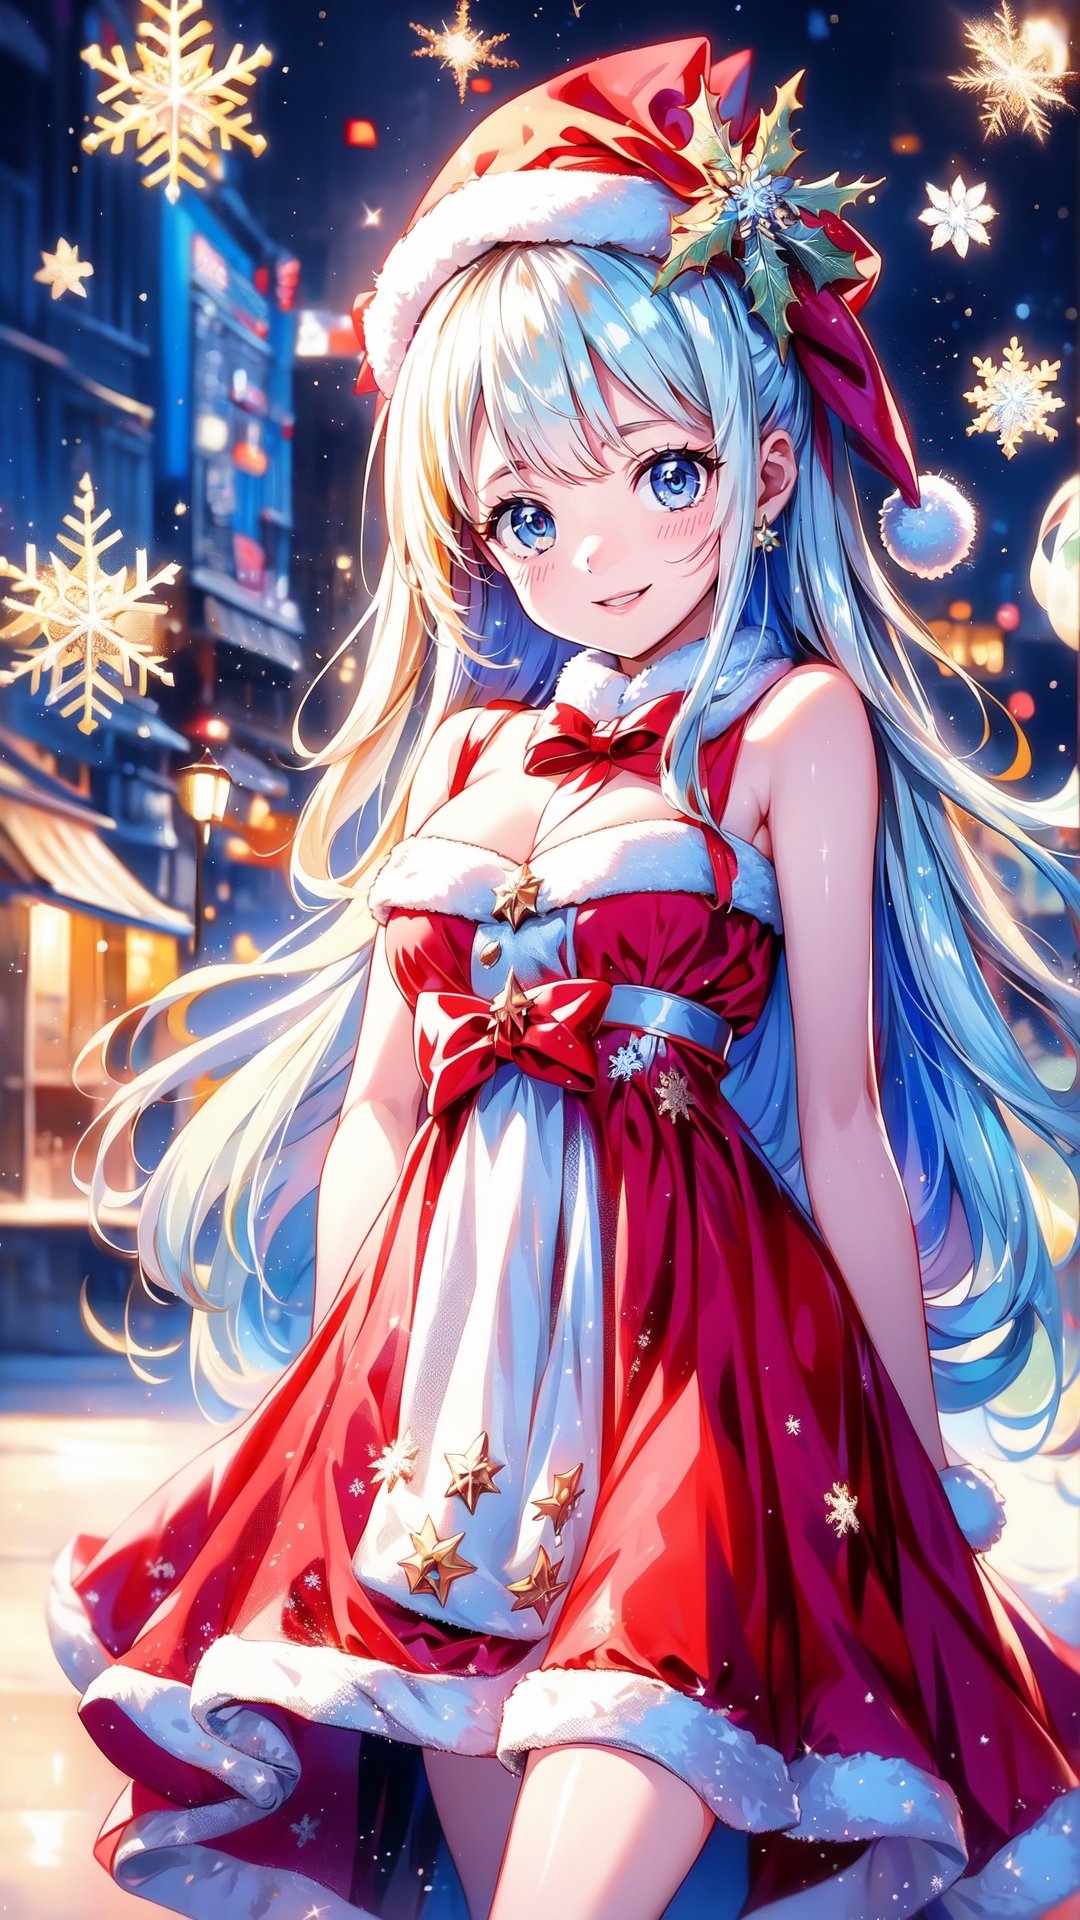 A little match seller in a Christmas costume surrounded by beautiful snowflakes,Snowflake